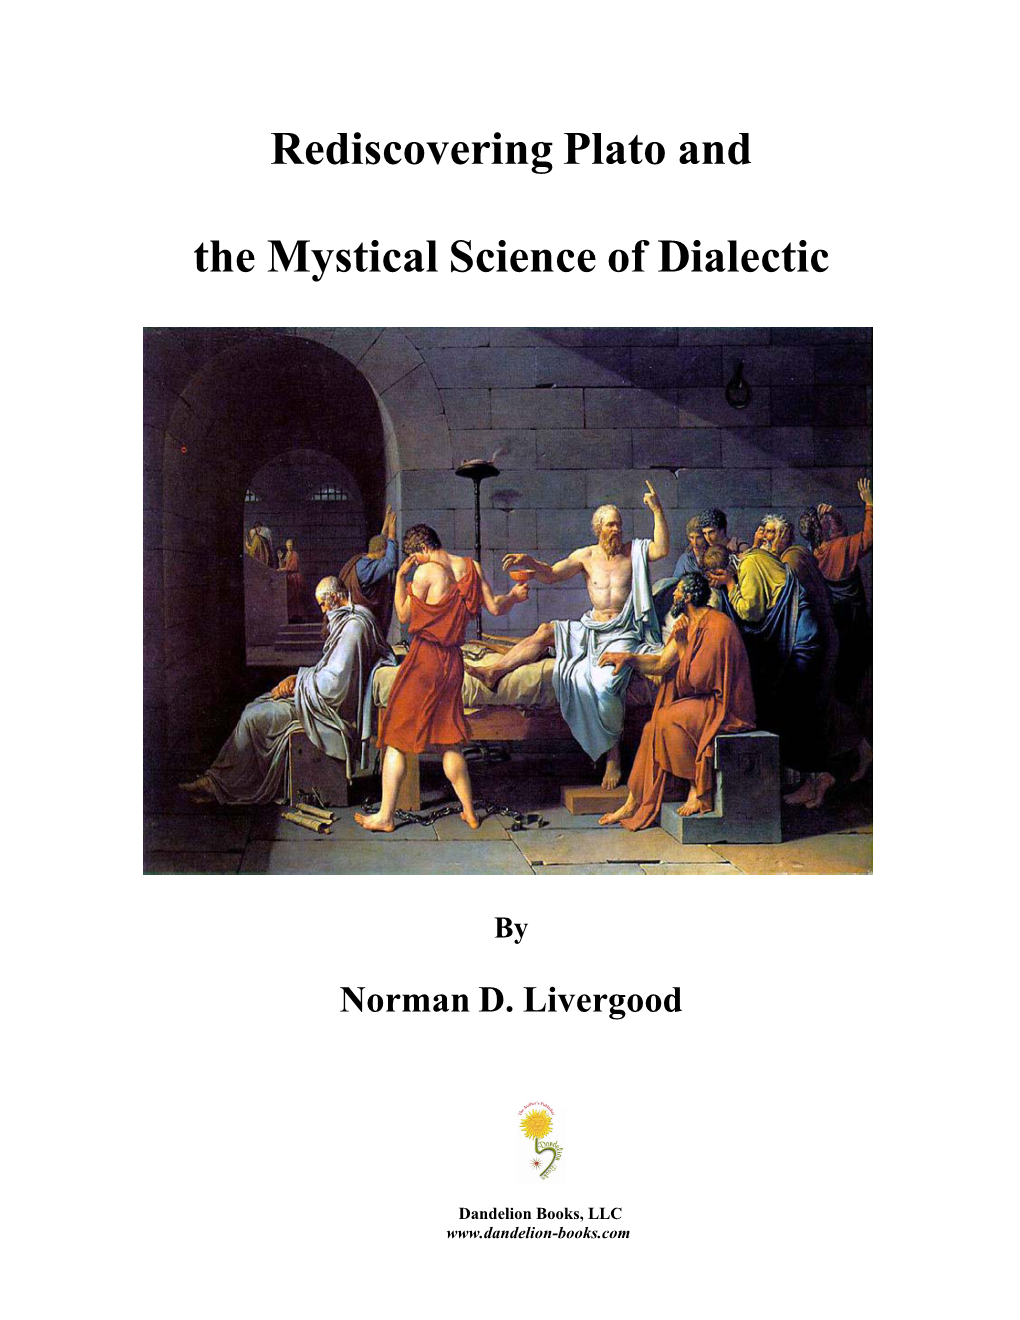 Rediscovering Plato and the Mystical Science of Dialectic ISBN 978-1-934280-61-4